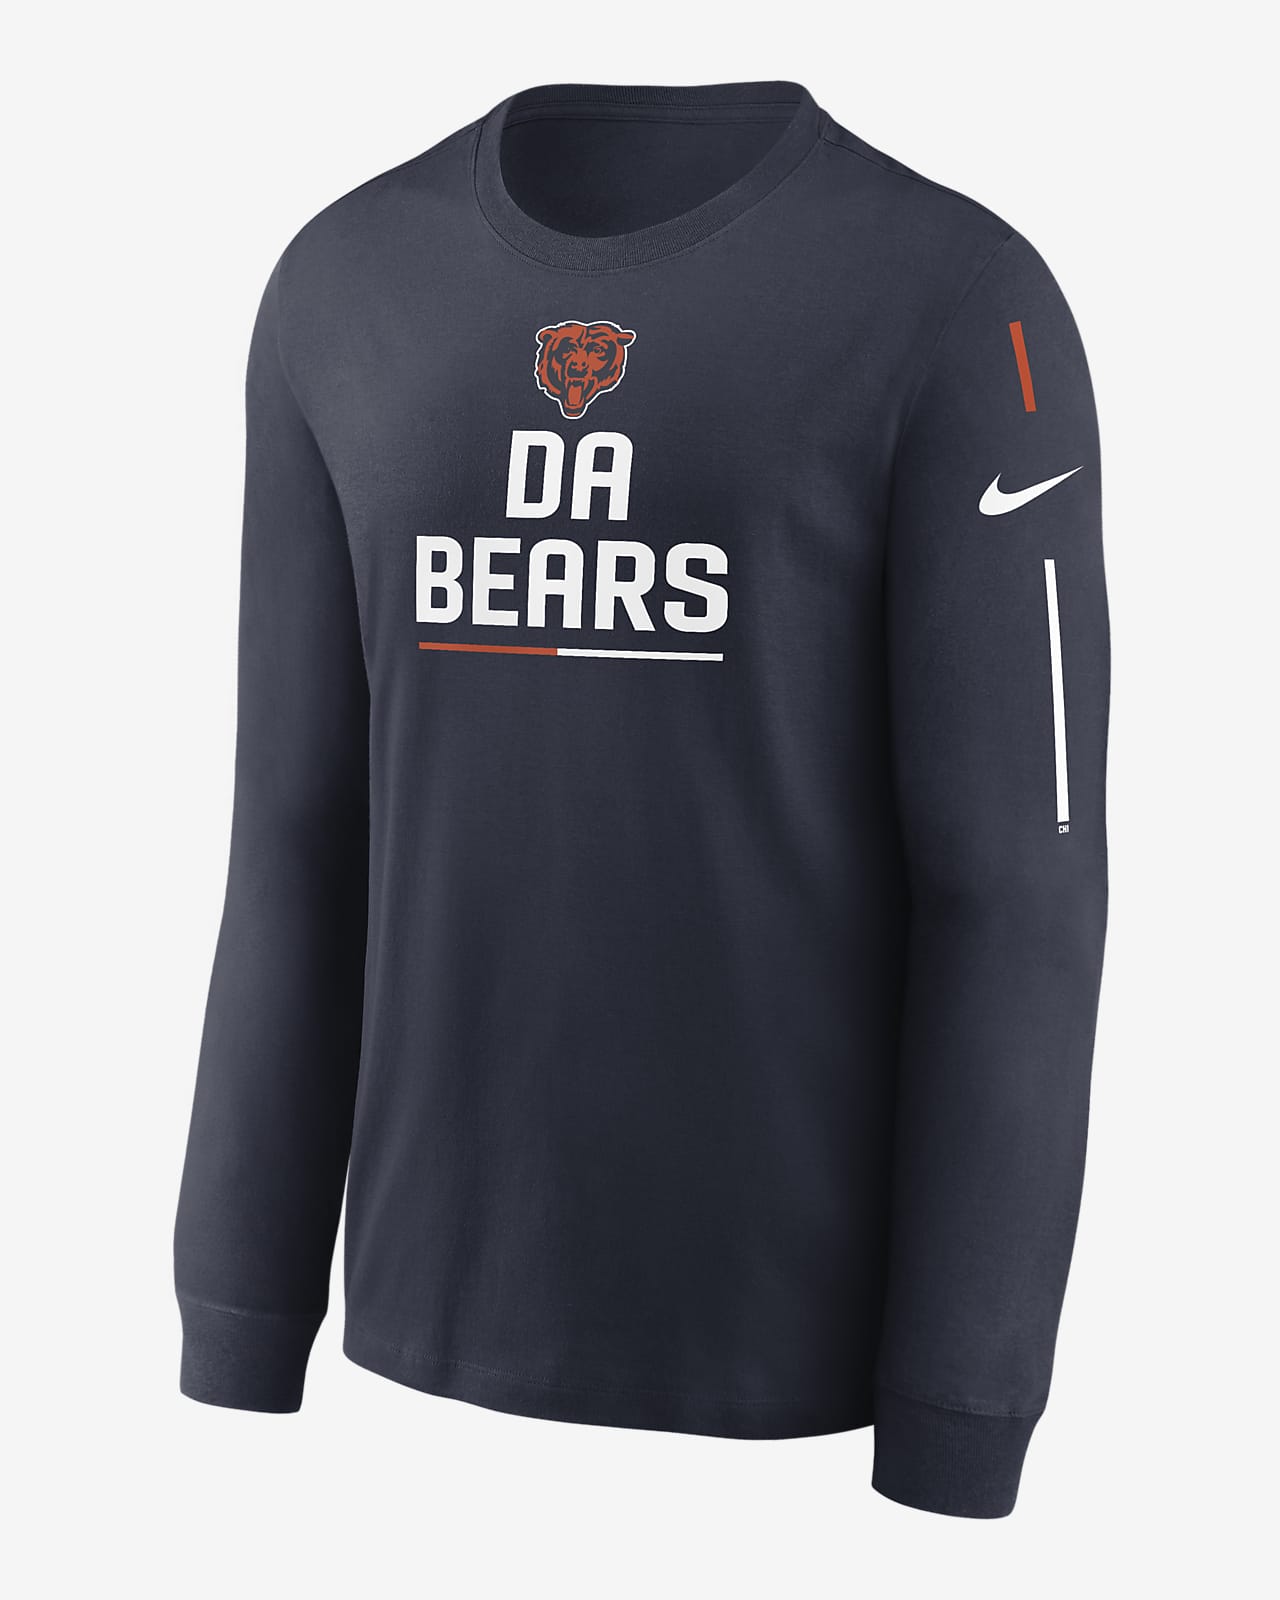 Personalized Chicago Bears Baseball Jersey Shirt For Fans